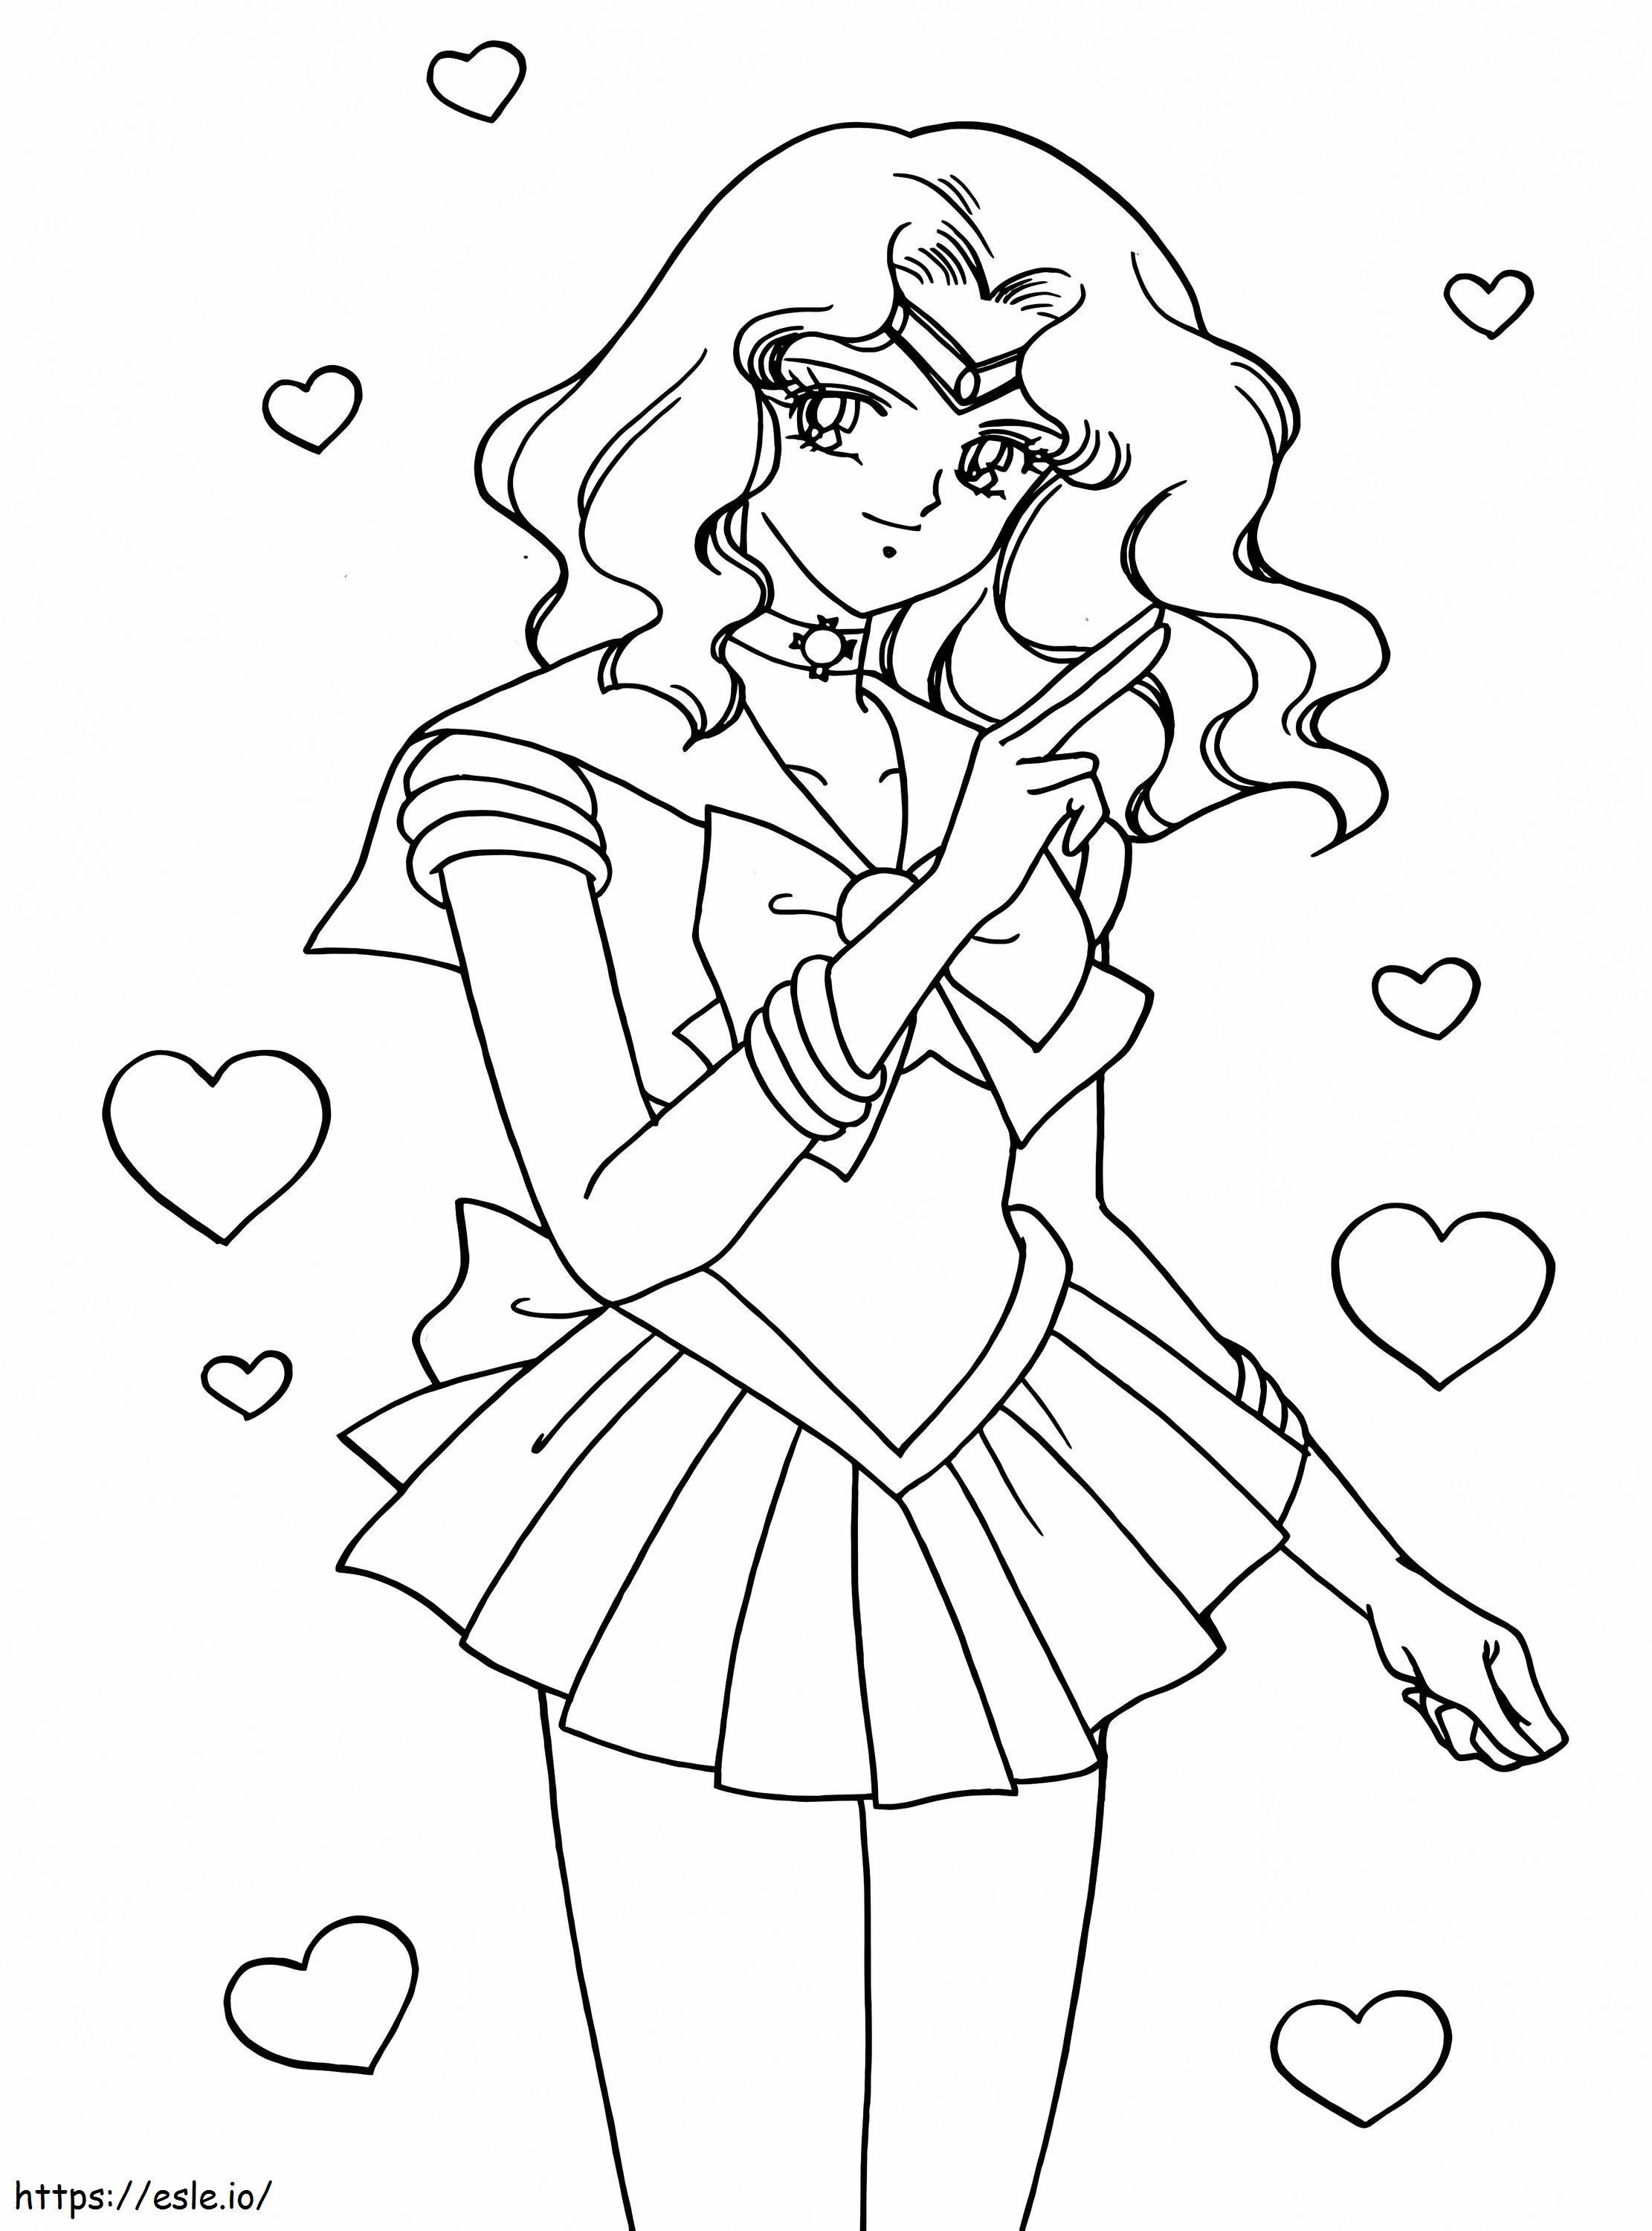 Cute Sailor Neptune coloring page